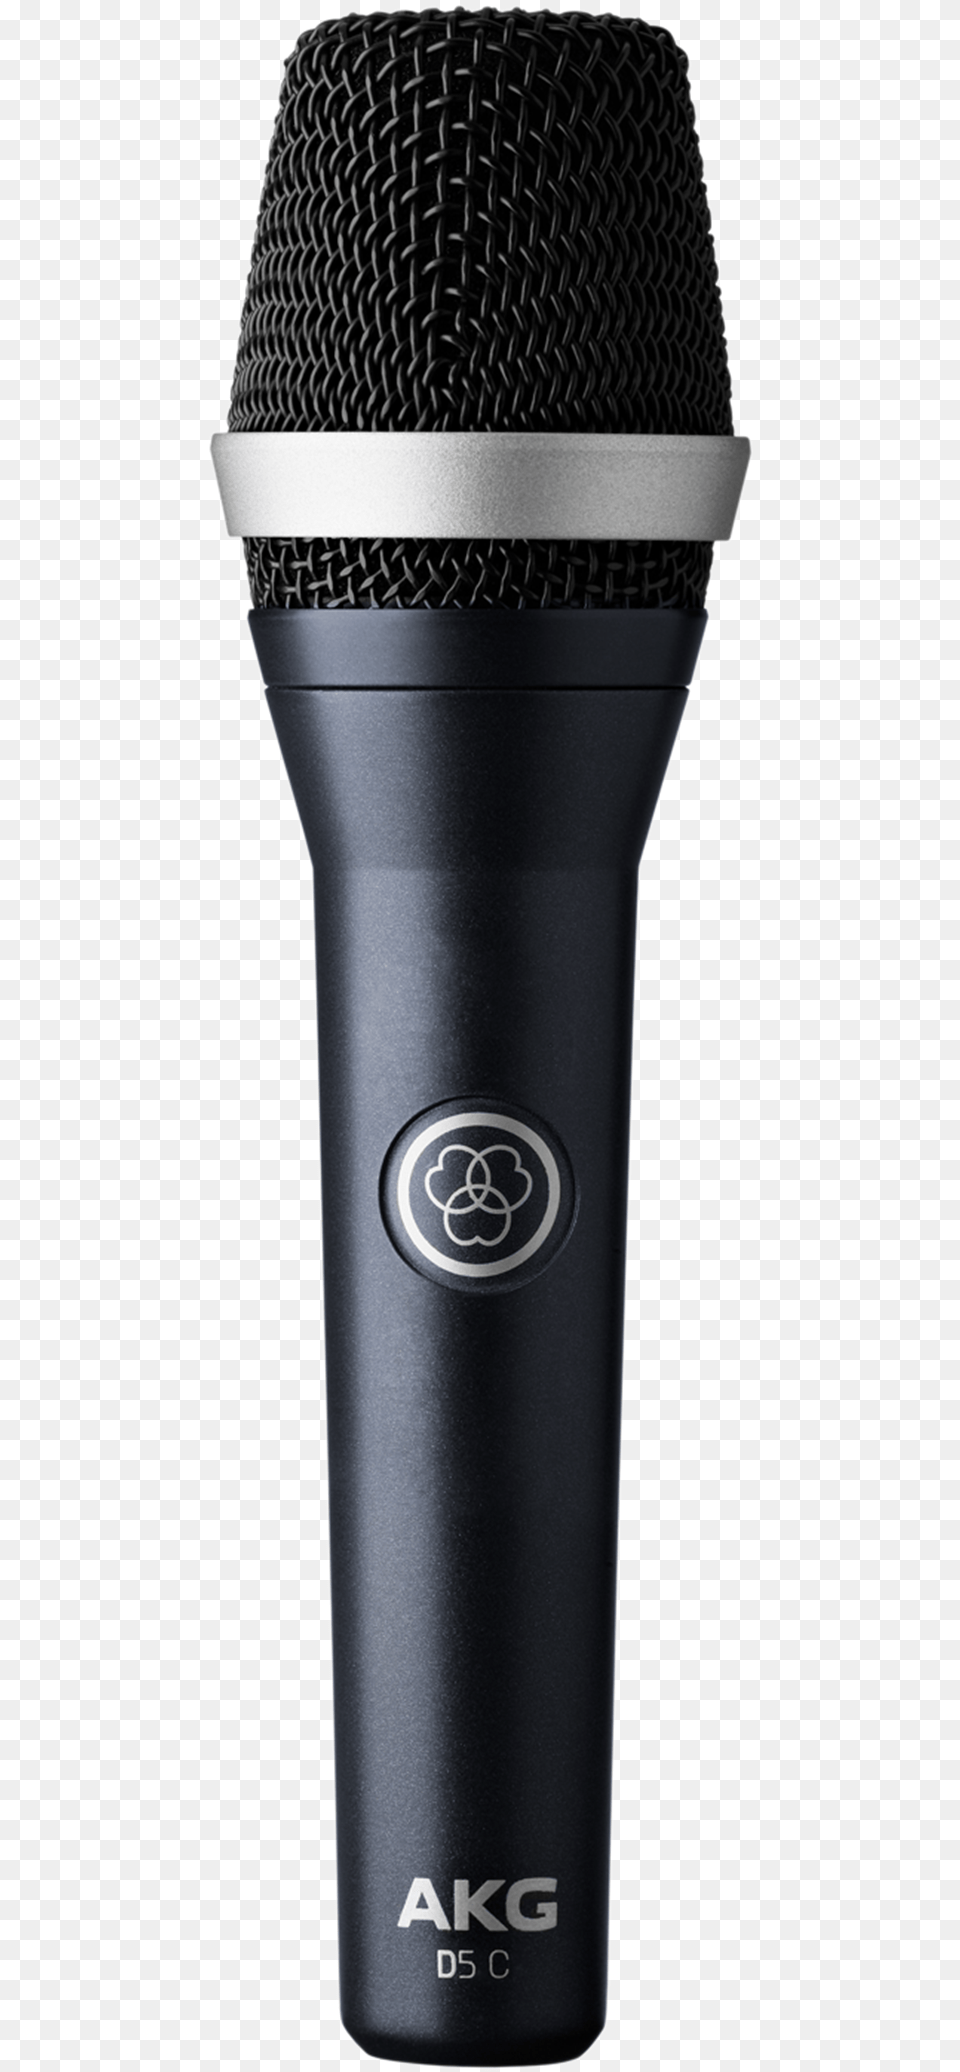 Akg D5 C, Electrical Device, Microphone, Bottle, Shaker Free Transparent Png